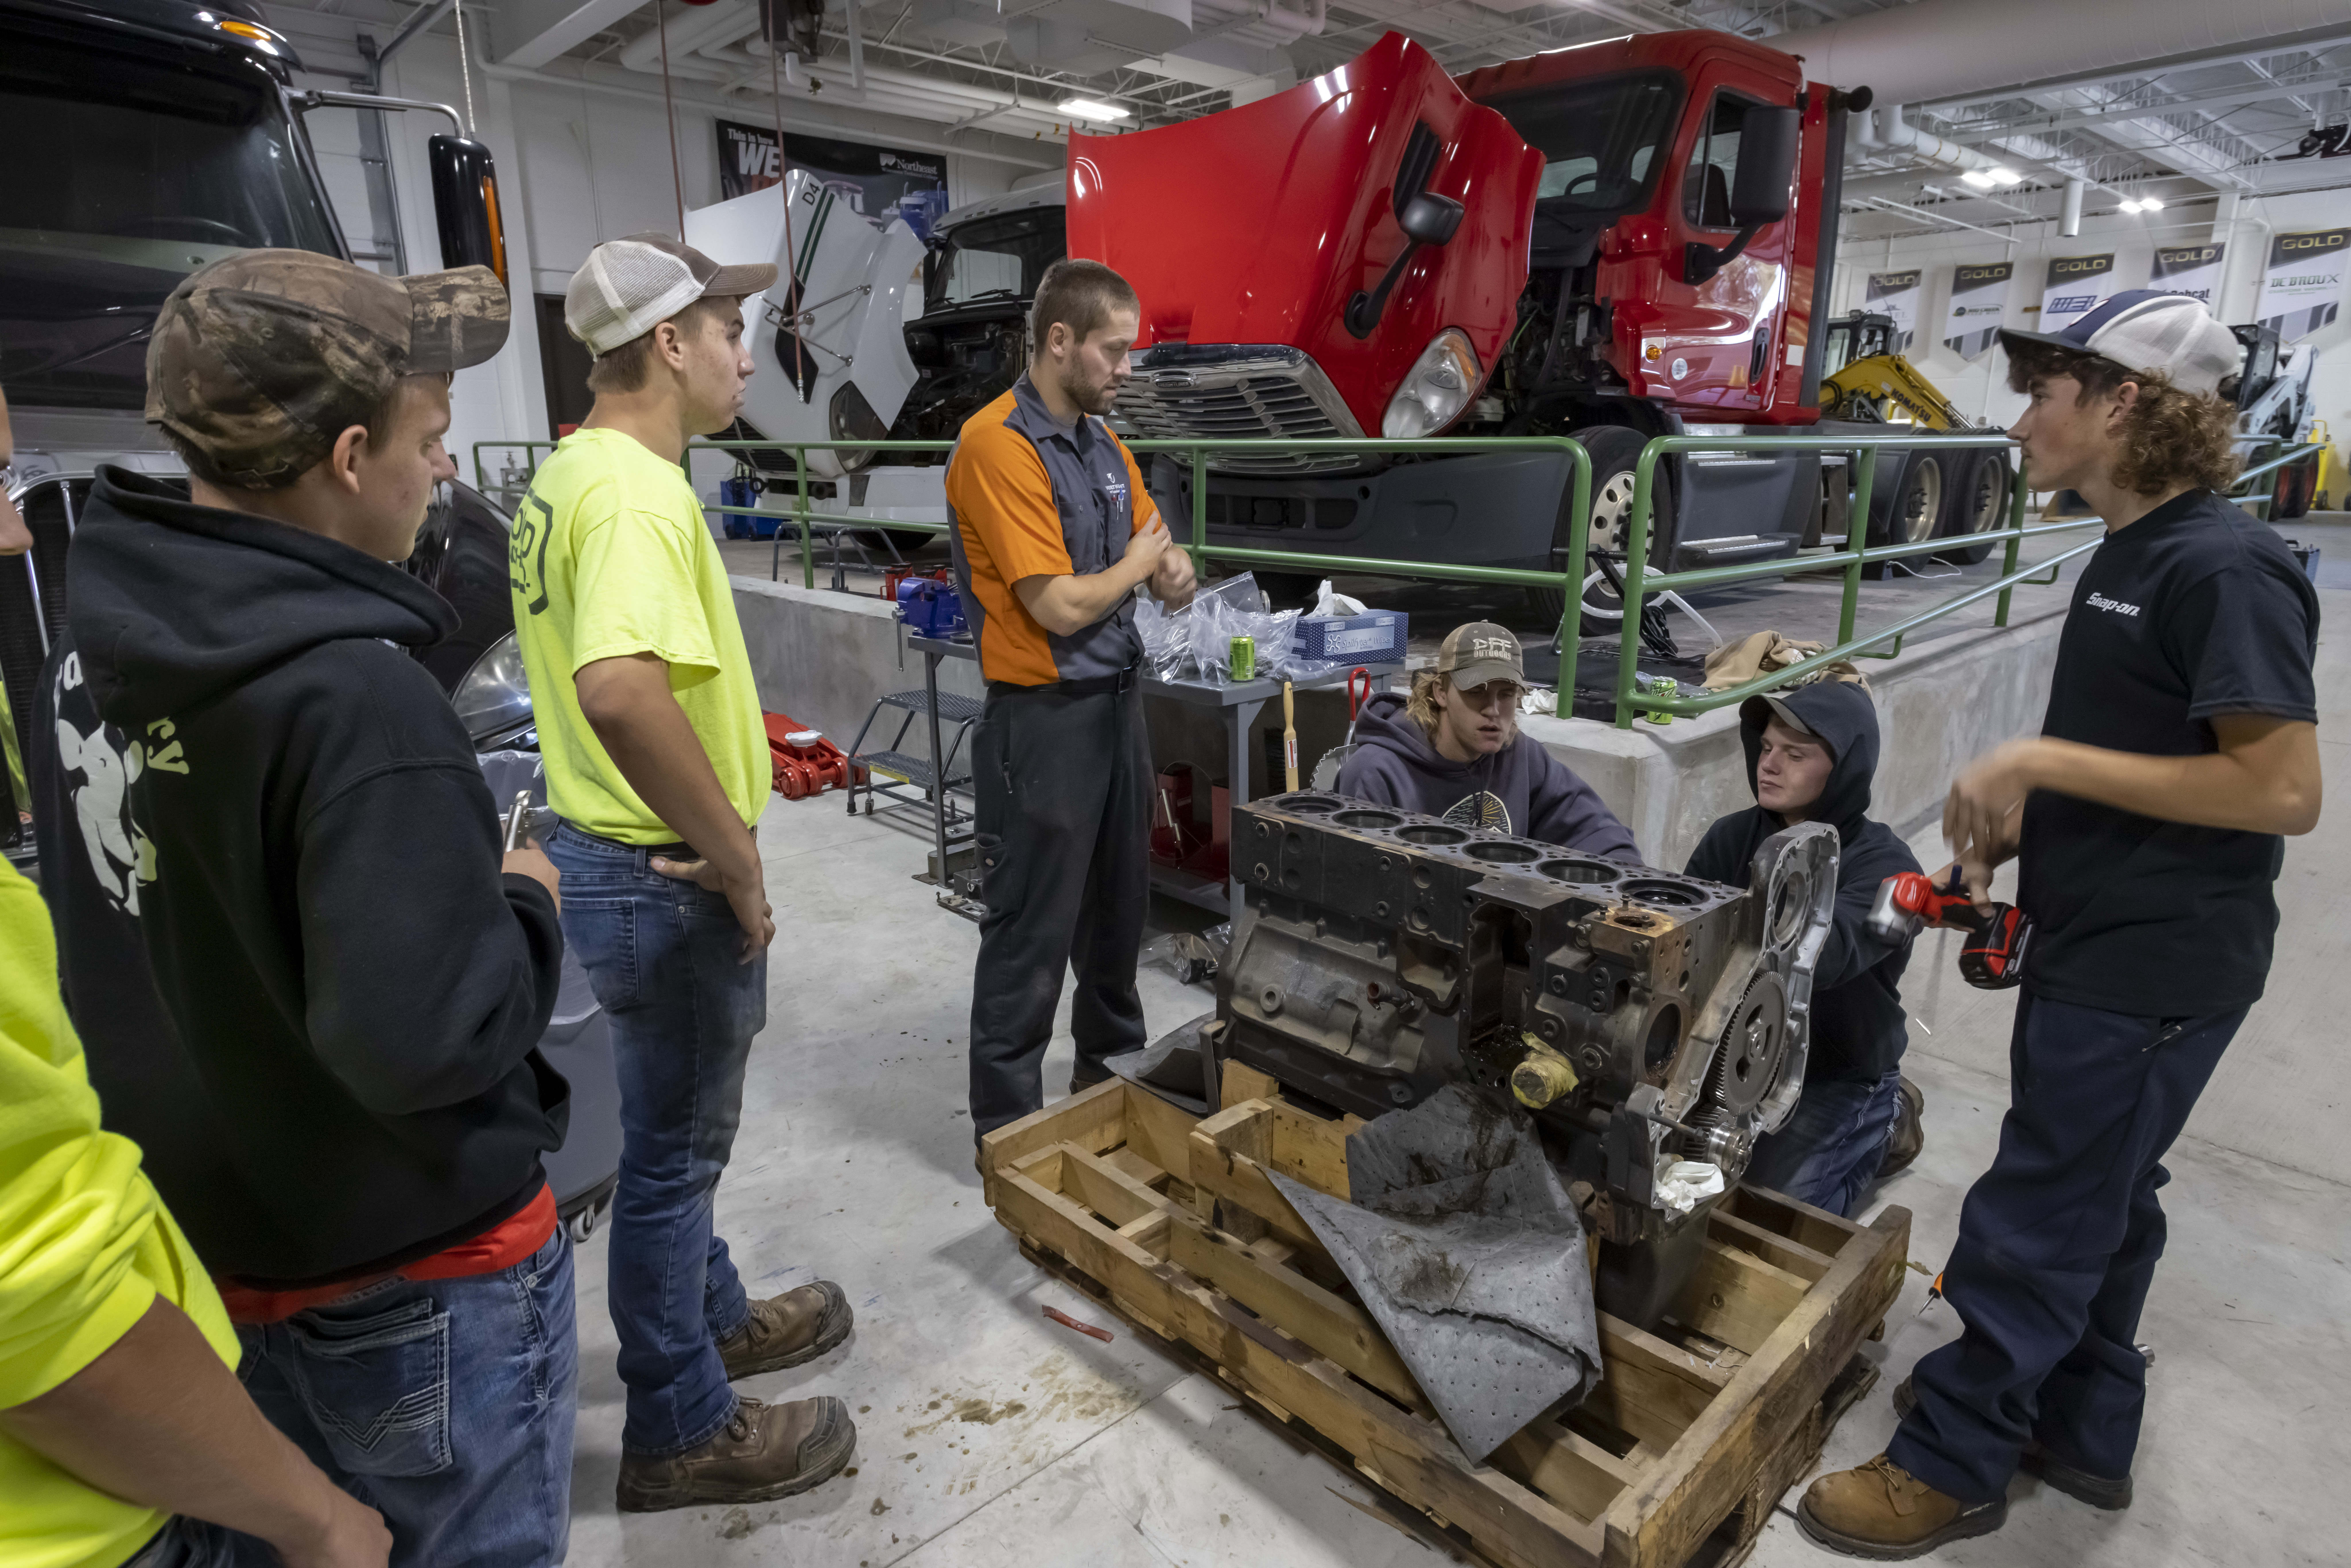 NWTC and Luxemburg-Casco School District Team Up to Offer Wisconsin's First Diesel-Only High School Education Program